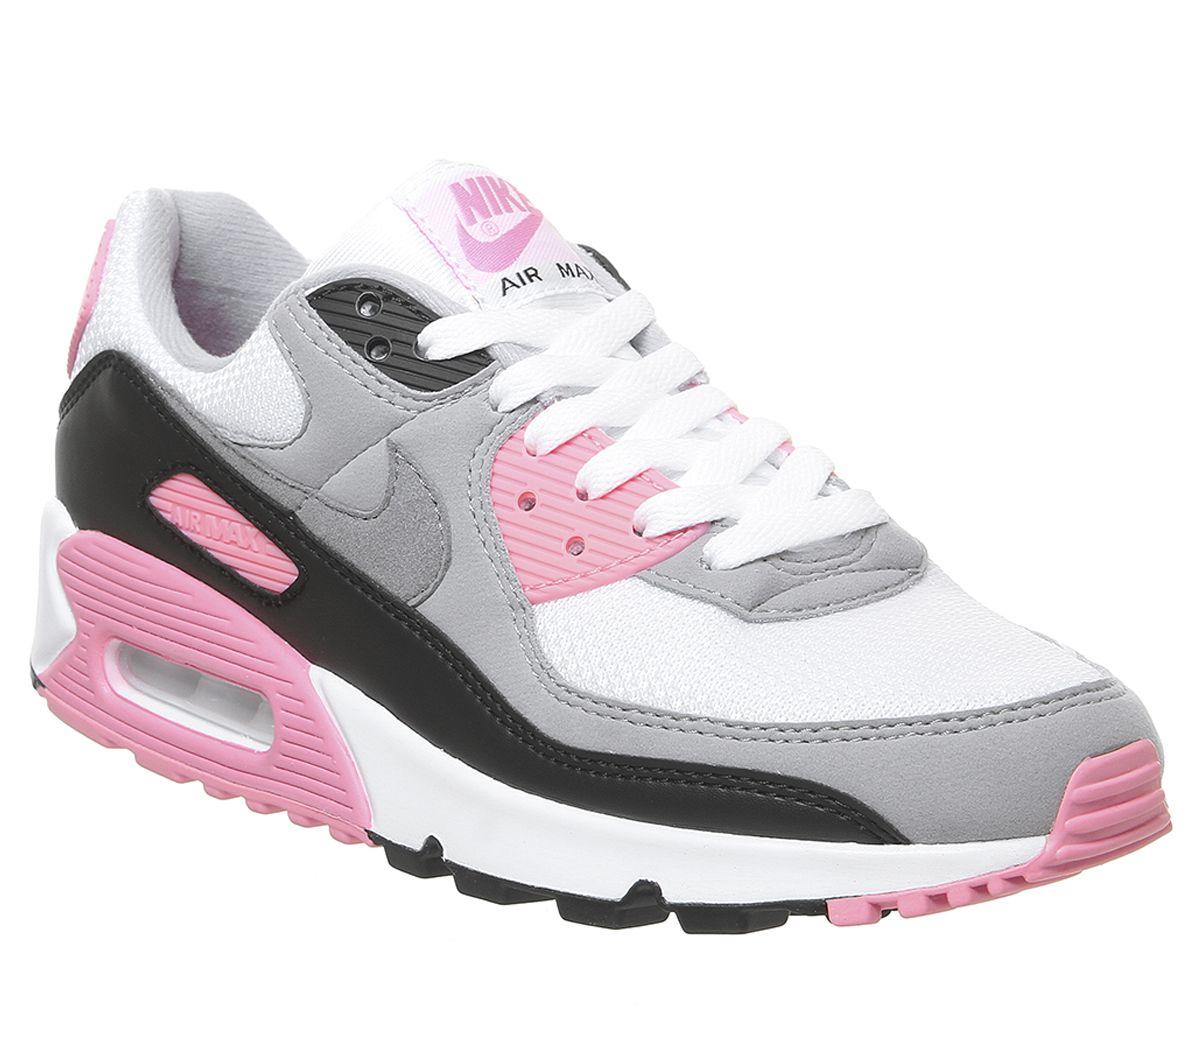 Nike Leather Air Max 90 Trainers in White Grey Rose (Gray) - Lyst